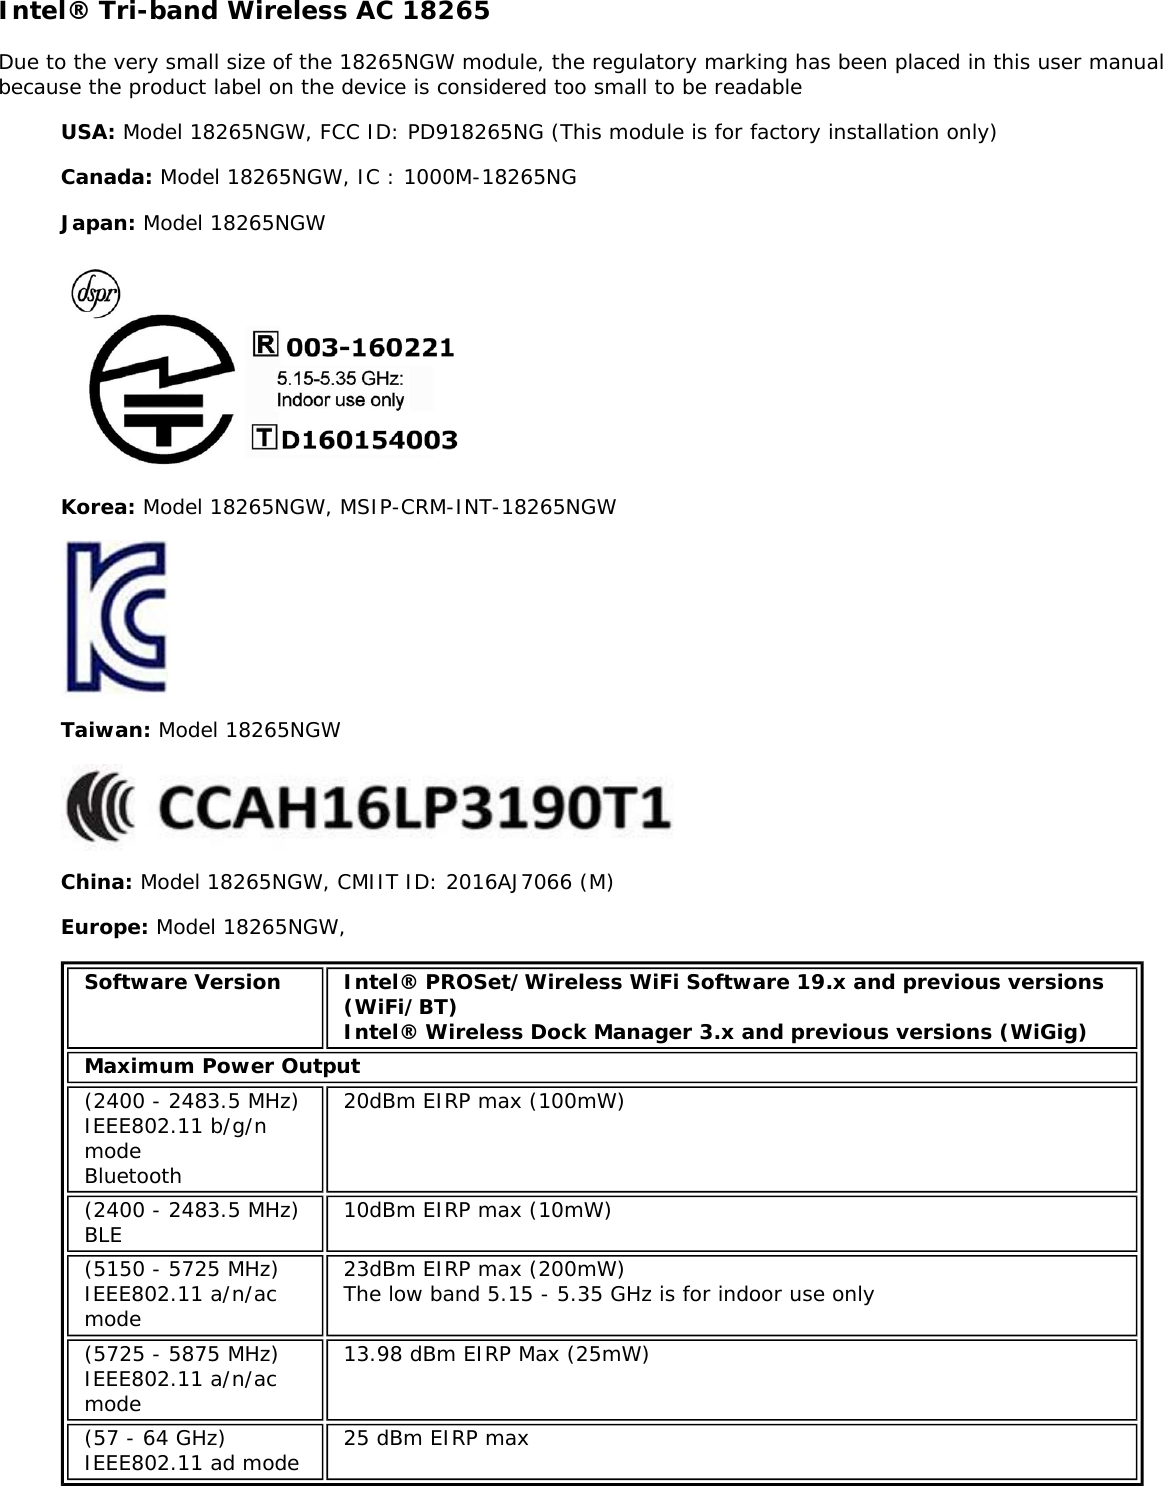 Intel® Tri-band Wireless AC 18265Due to the very small size of the 18265NGW module, the regulatory marking has been placed in this user manualbecause the product label on the device is considered too small to be readableUSA: Model 18265NGW, FCC ID: PD918265NG (This module is for factory installation only)Canada: Model 18265NGW, IC : 1000M-18265NGJapan: Model 18265NGWKorea: Model 18265NGW, MSIP-CRM-INT-18265NGWTaiwan: Model 18265NGWChina: Model 18265NGW, CMIIT ID: 2016AJ7066 (M)Europe: Model 18265NGW,Software Version Intel® PROSet/Wireless WiFi Software 19.x and previous versions(WiFi/BT)Intel® Wireless Dock Manager 3.x and previous versions (WiGig)Maximum Power Output(2400 - 2483.5 MHz)IEEE802.11 b/g/nmodeBluetooth20dBm EIRP max (100mW)(2400 - 2483.5 MHz)BLE 10dBm EIRP max (10mW)(5150 - 5725 MHz)IEEE802.11 a/n/acmode23dBm EIRP max (200mW)The low band 5.15 - 5.35 GHz is for indoor use only(5725 - 5875 MHz)IEEE802.11 a/n/acmode13.98 dBm EIRP Max (25mW)(57 - 64 GHz)IEEE802.11 ad mode 25 dBm EIRP max